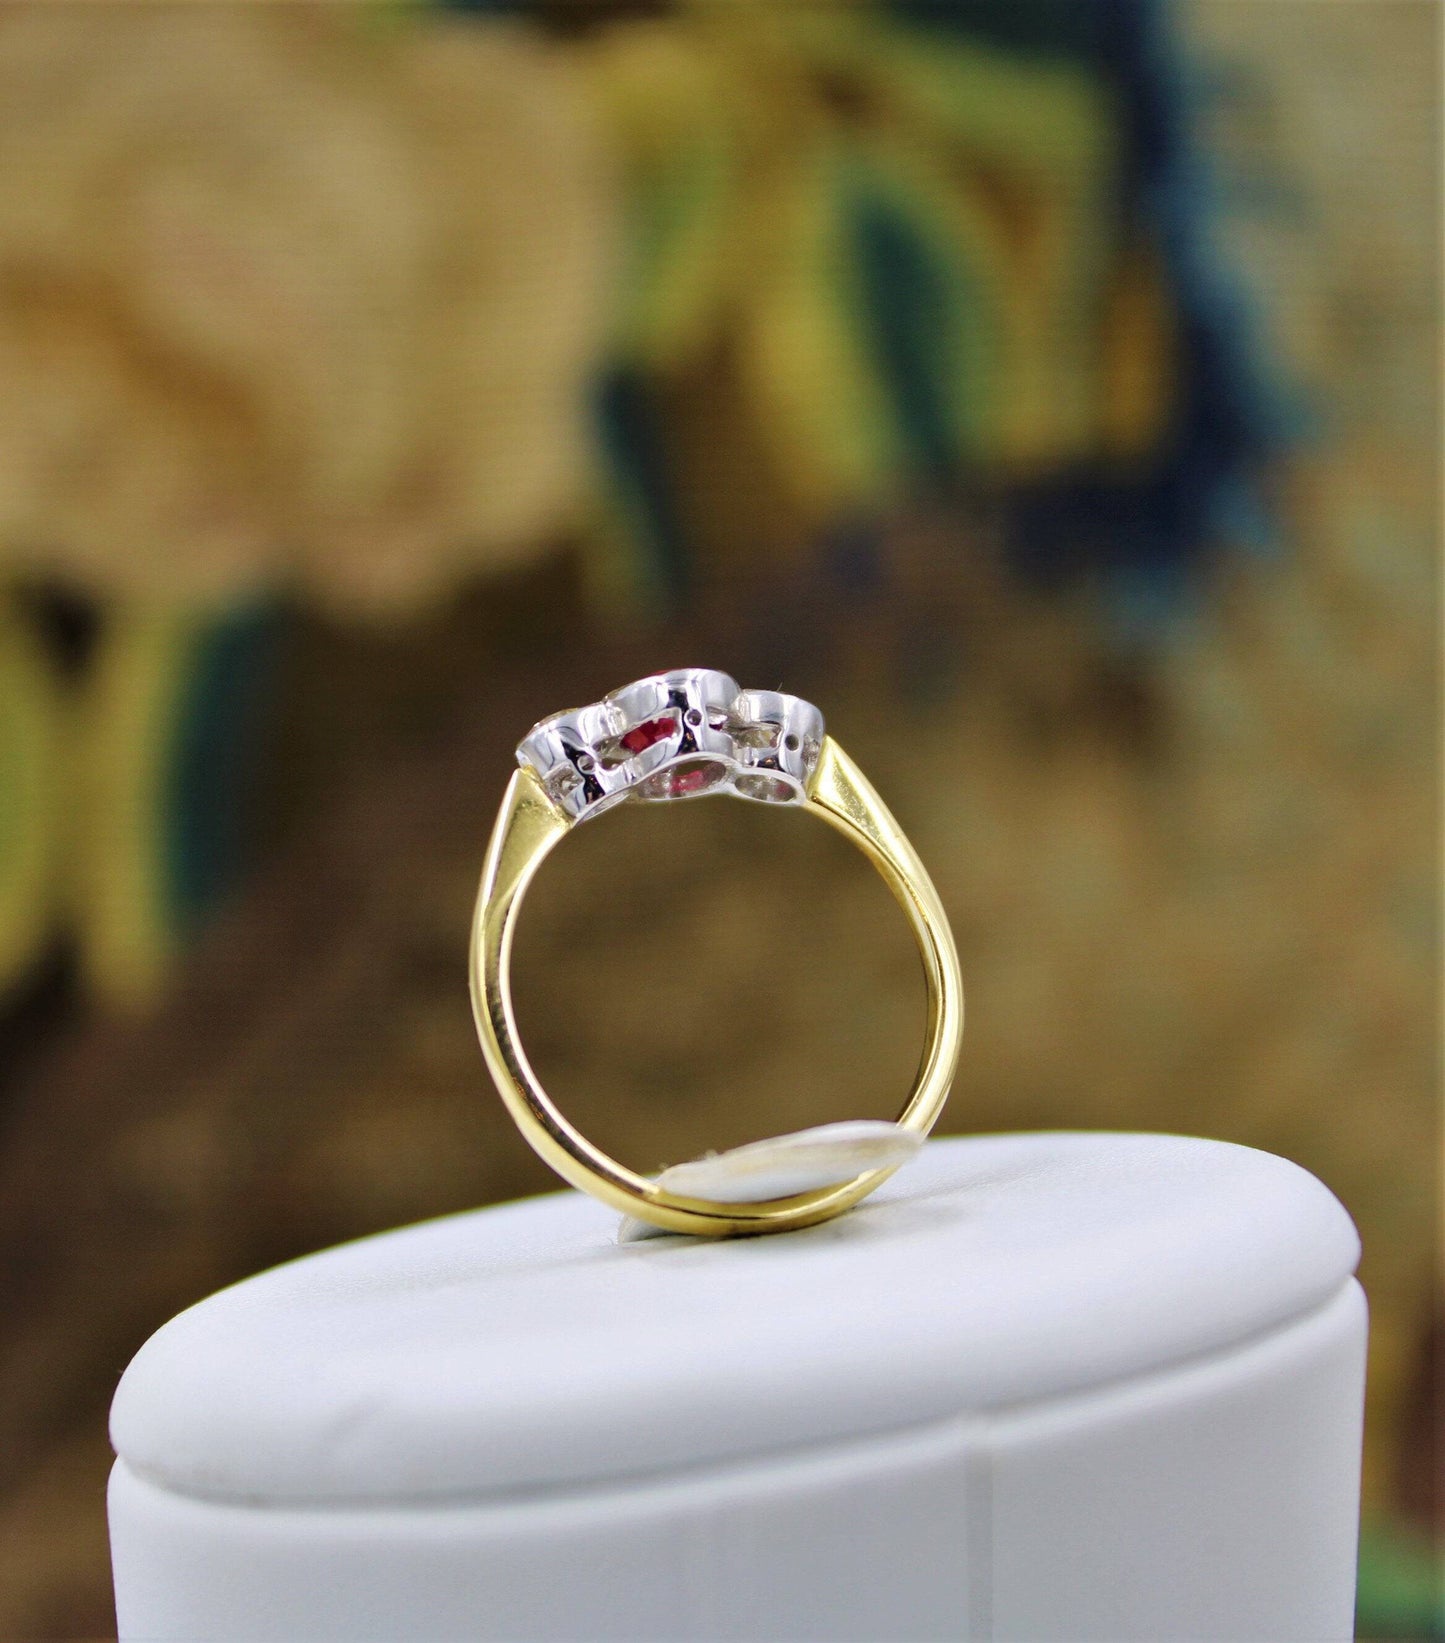 A very fine Oval Natural Ruby & Diamond Ring mounted in 18ct Yellow Gold & Platinum, Pre-owned - Robin Haydock Antiques